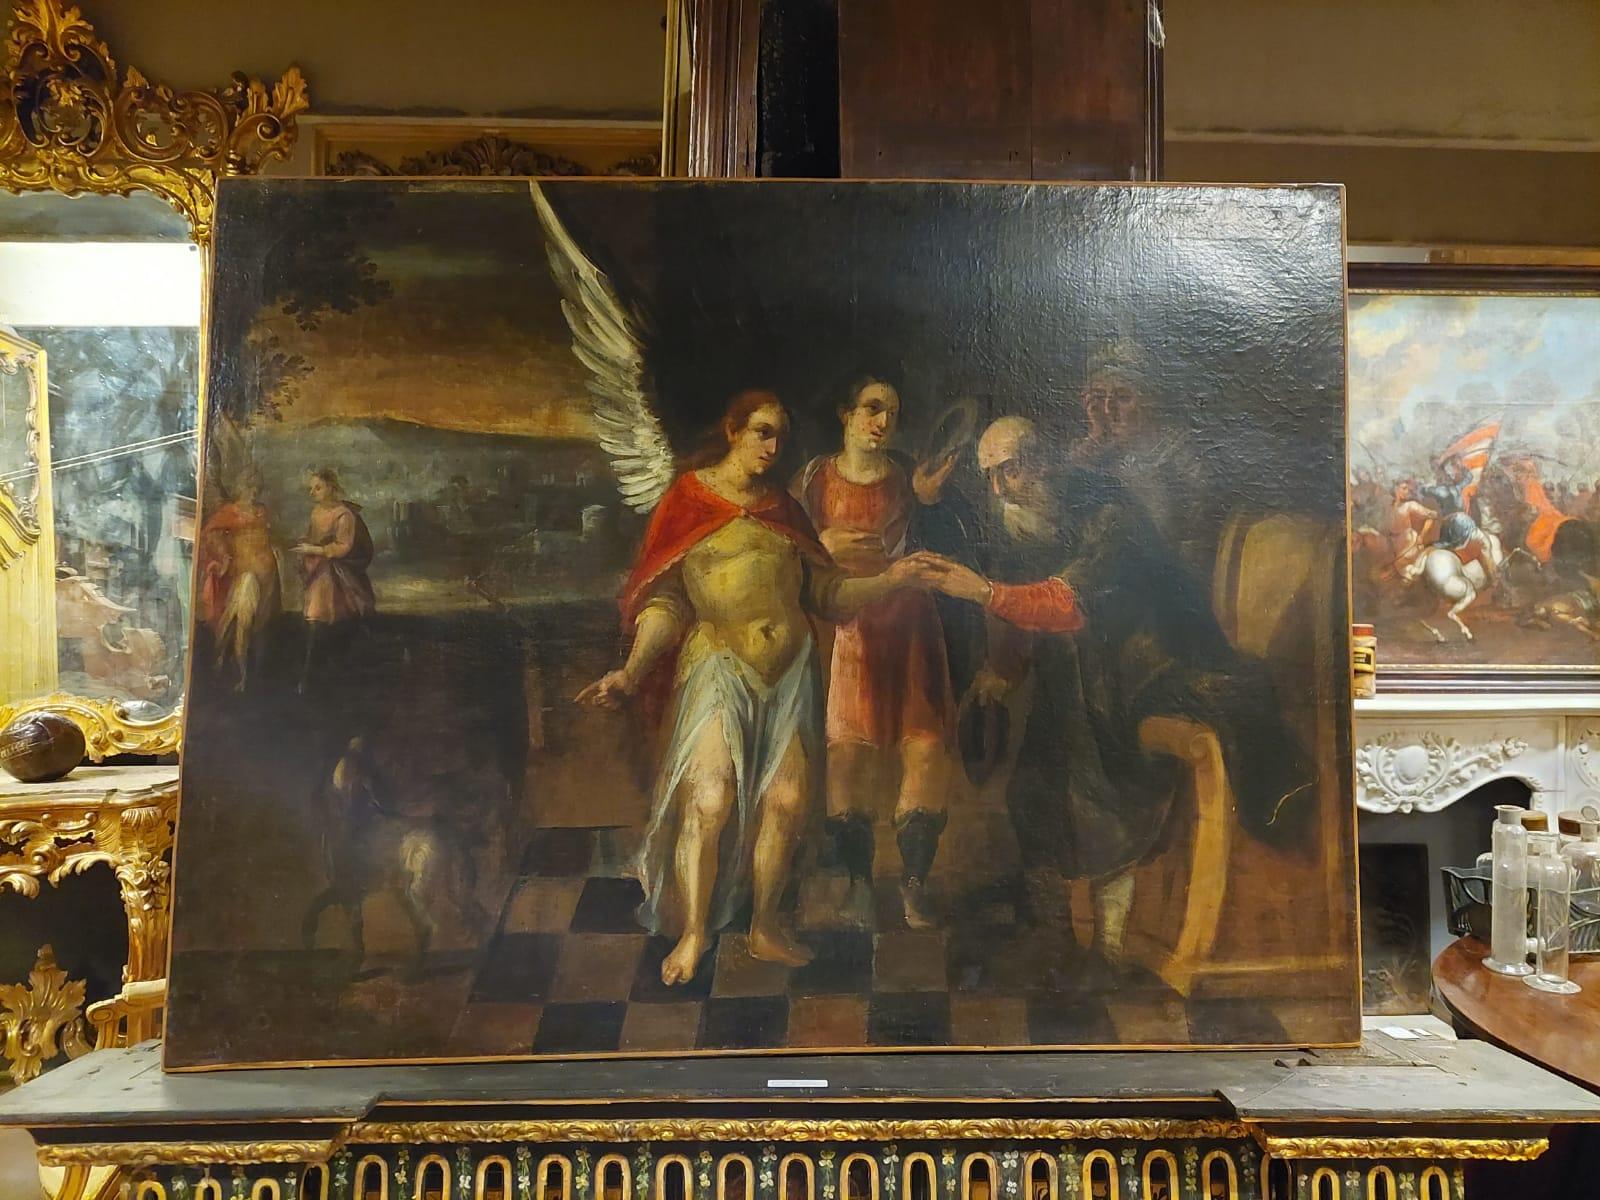 Antique hand painted oil on canvas, subject of the time depicting the archangel descended on earth, original from the 18th century in Italy.
Original and of good size to furnish a classy interior in an antique style, in excellent conservation